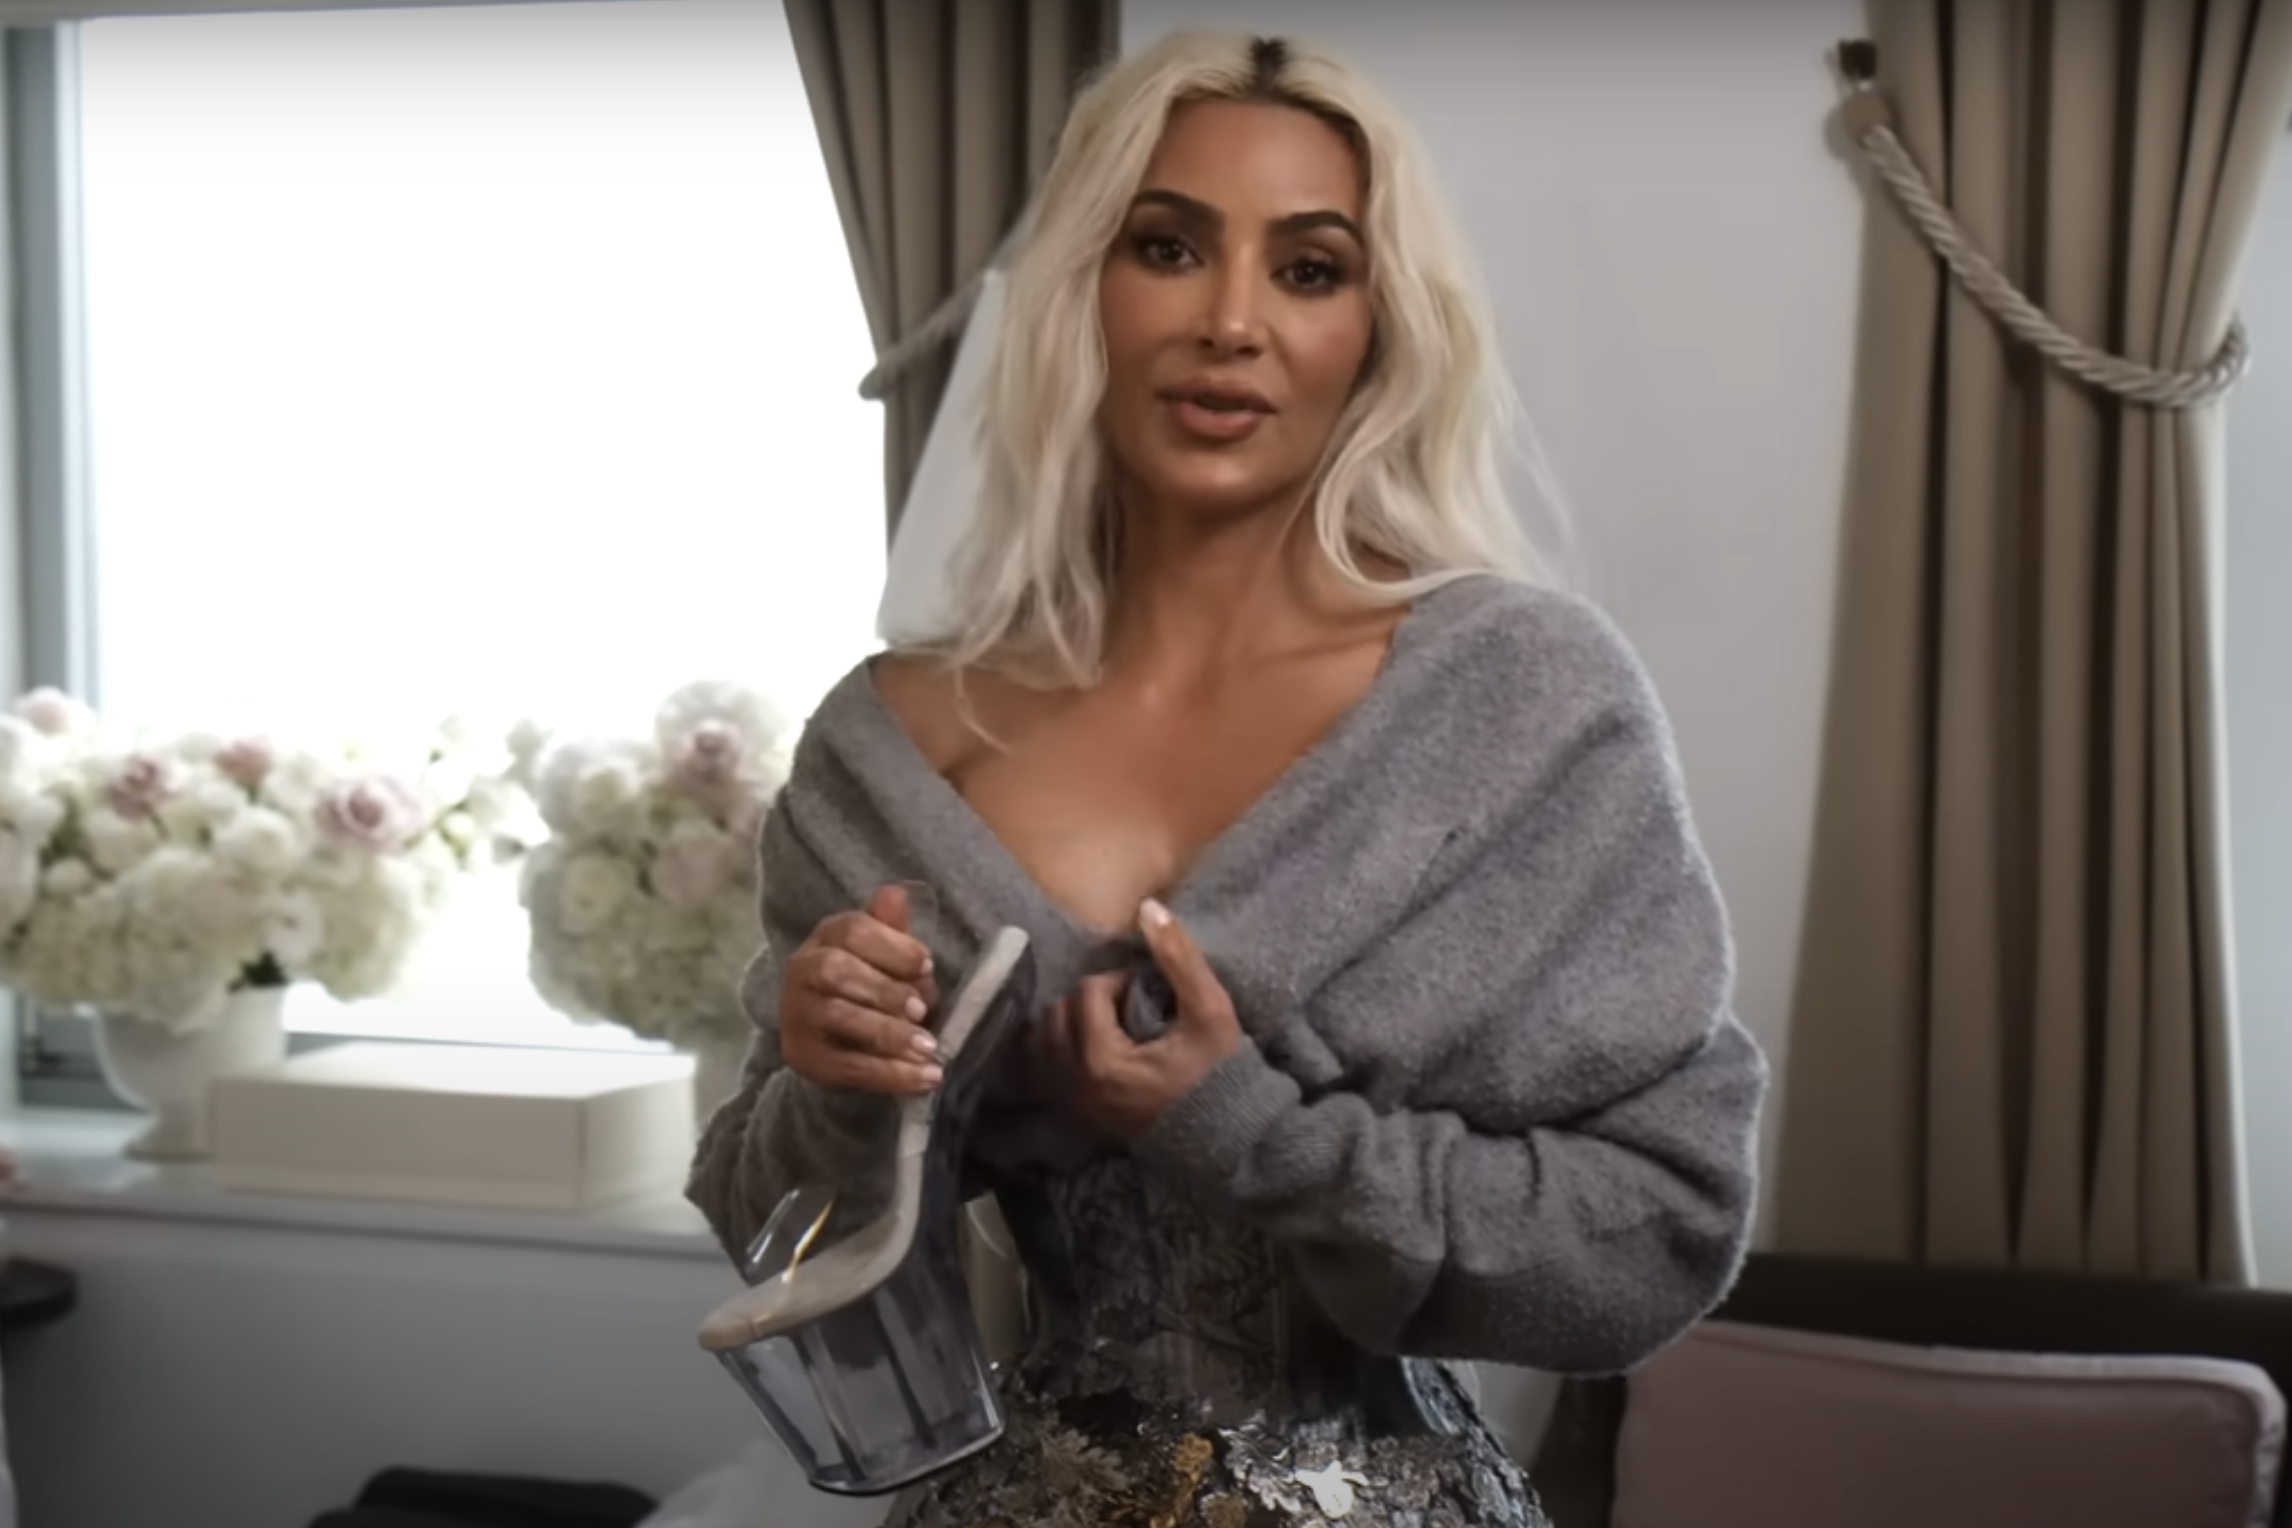 Kim Kardashian Explains Why She Was Awkwardly Holding Sweater Over Her Chest at The Met Gala